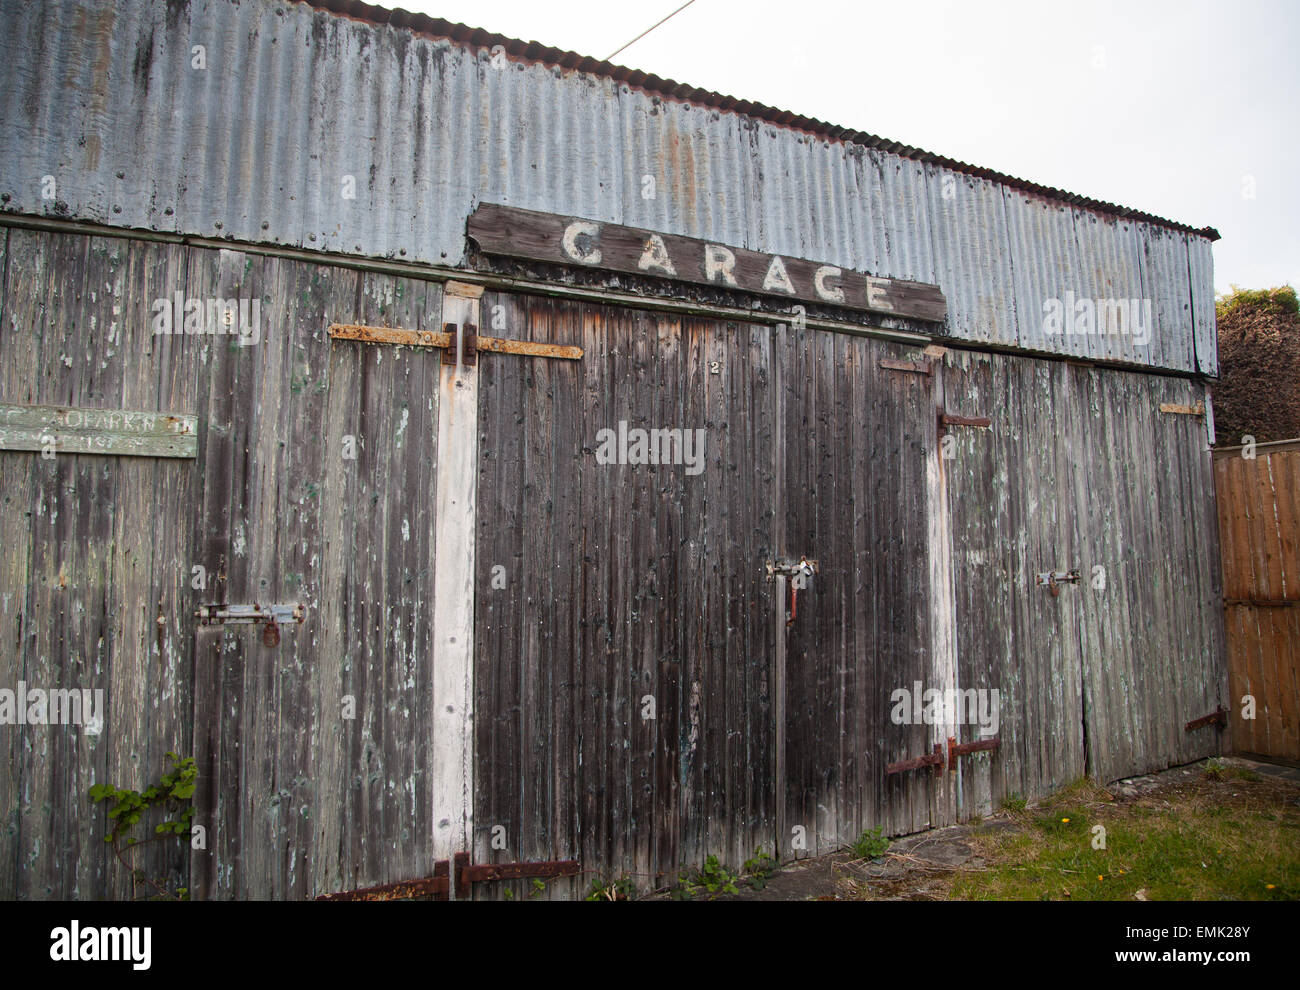 Disused corrugated steel & timber garages in Borth-y-Gest, Porthmadog with rust, flaking paint and hand-painted signage Stock Photo